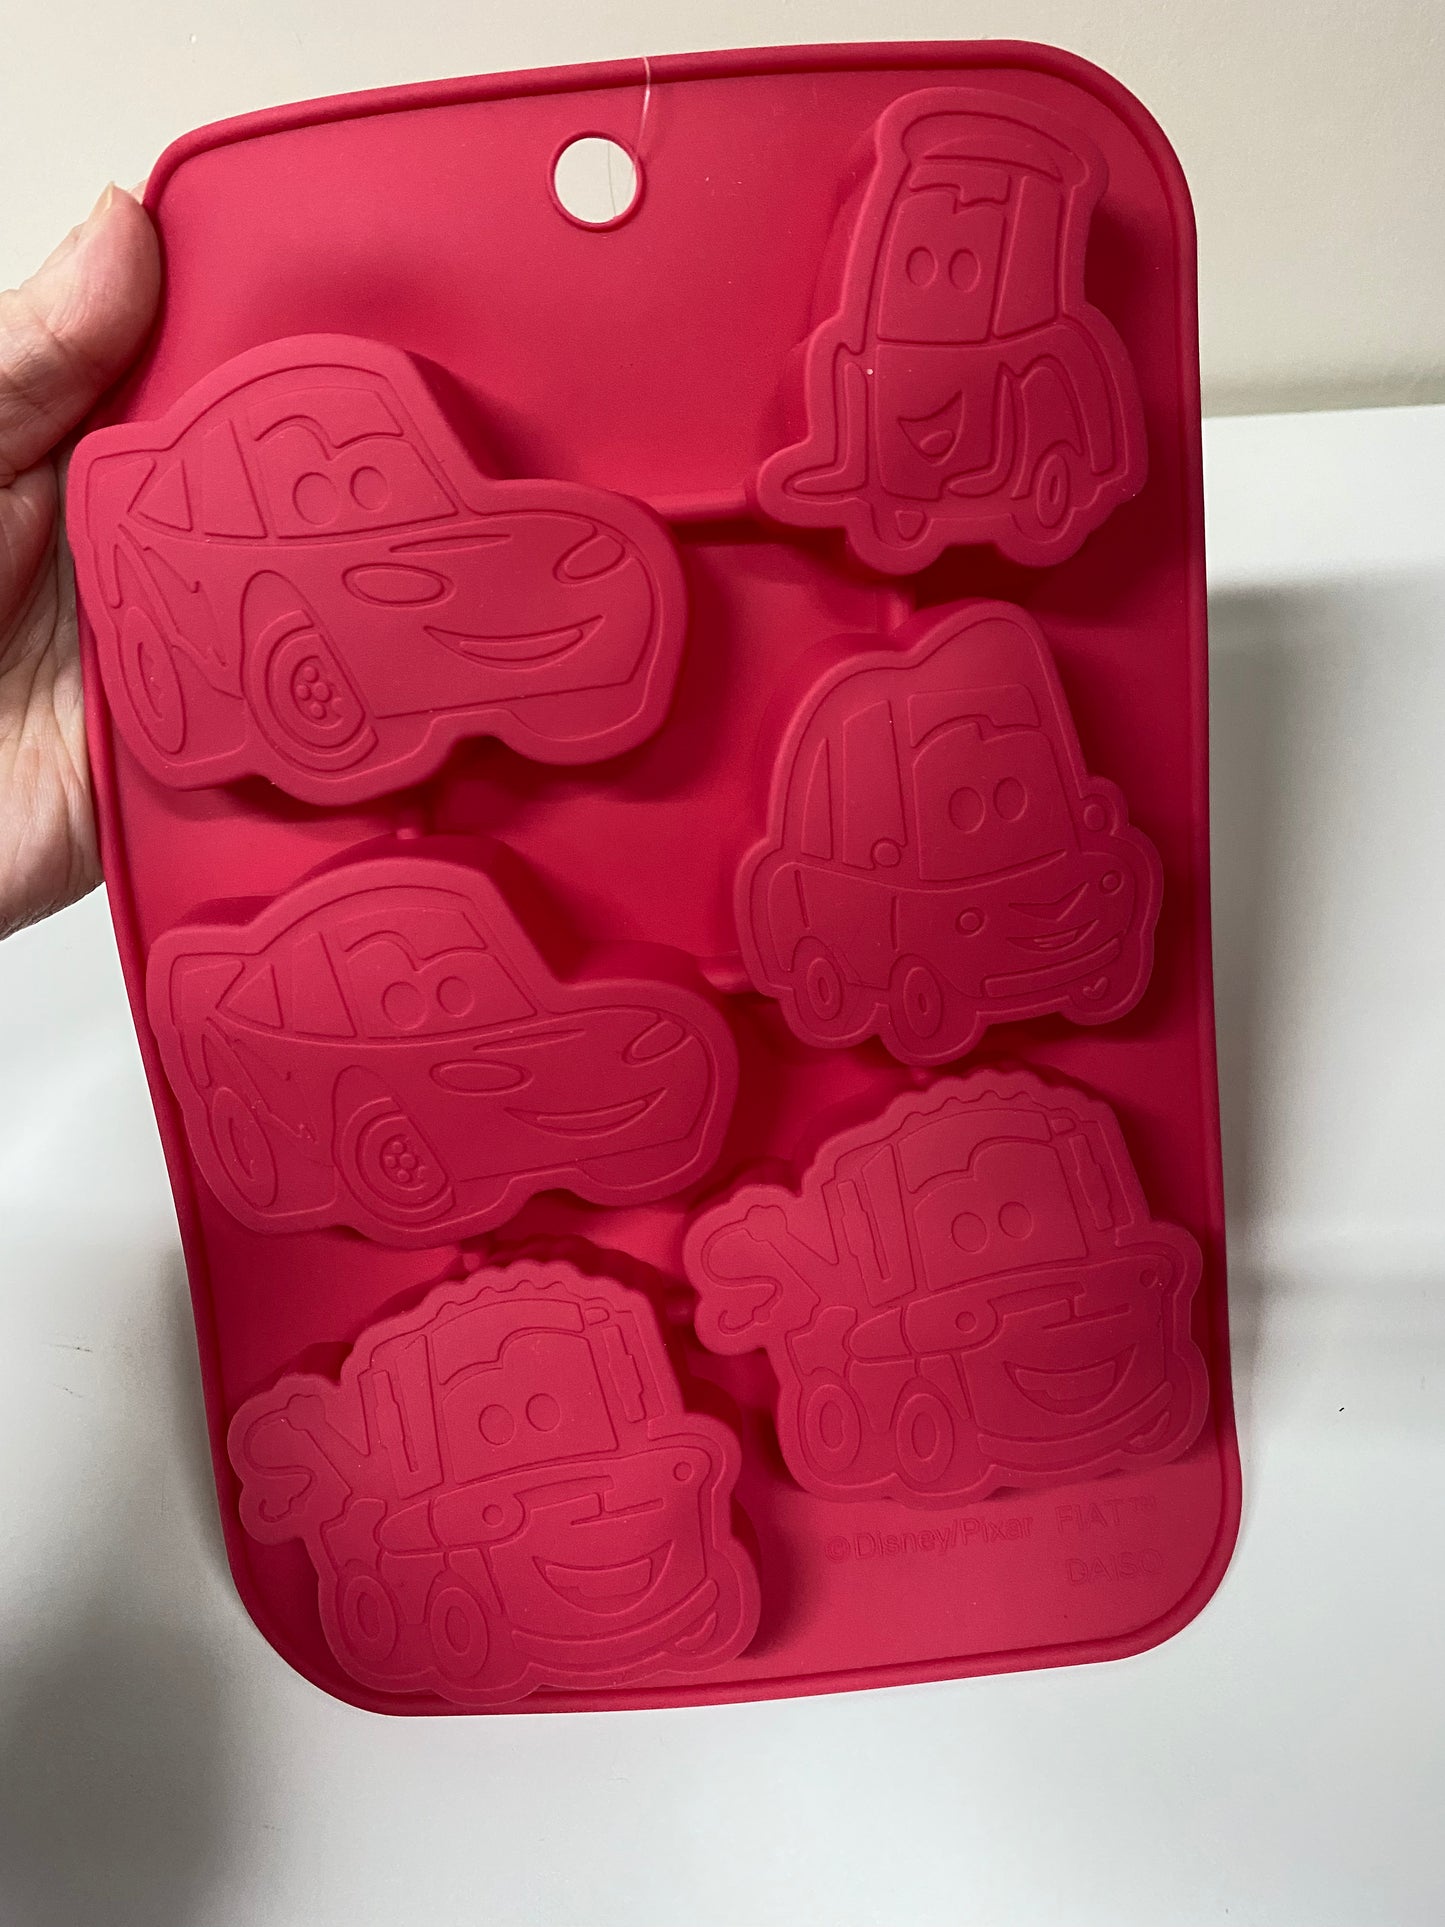 Japan Disney Car Cars Silicone Petite Cake Chocolate Ice Jelly Candle Mold